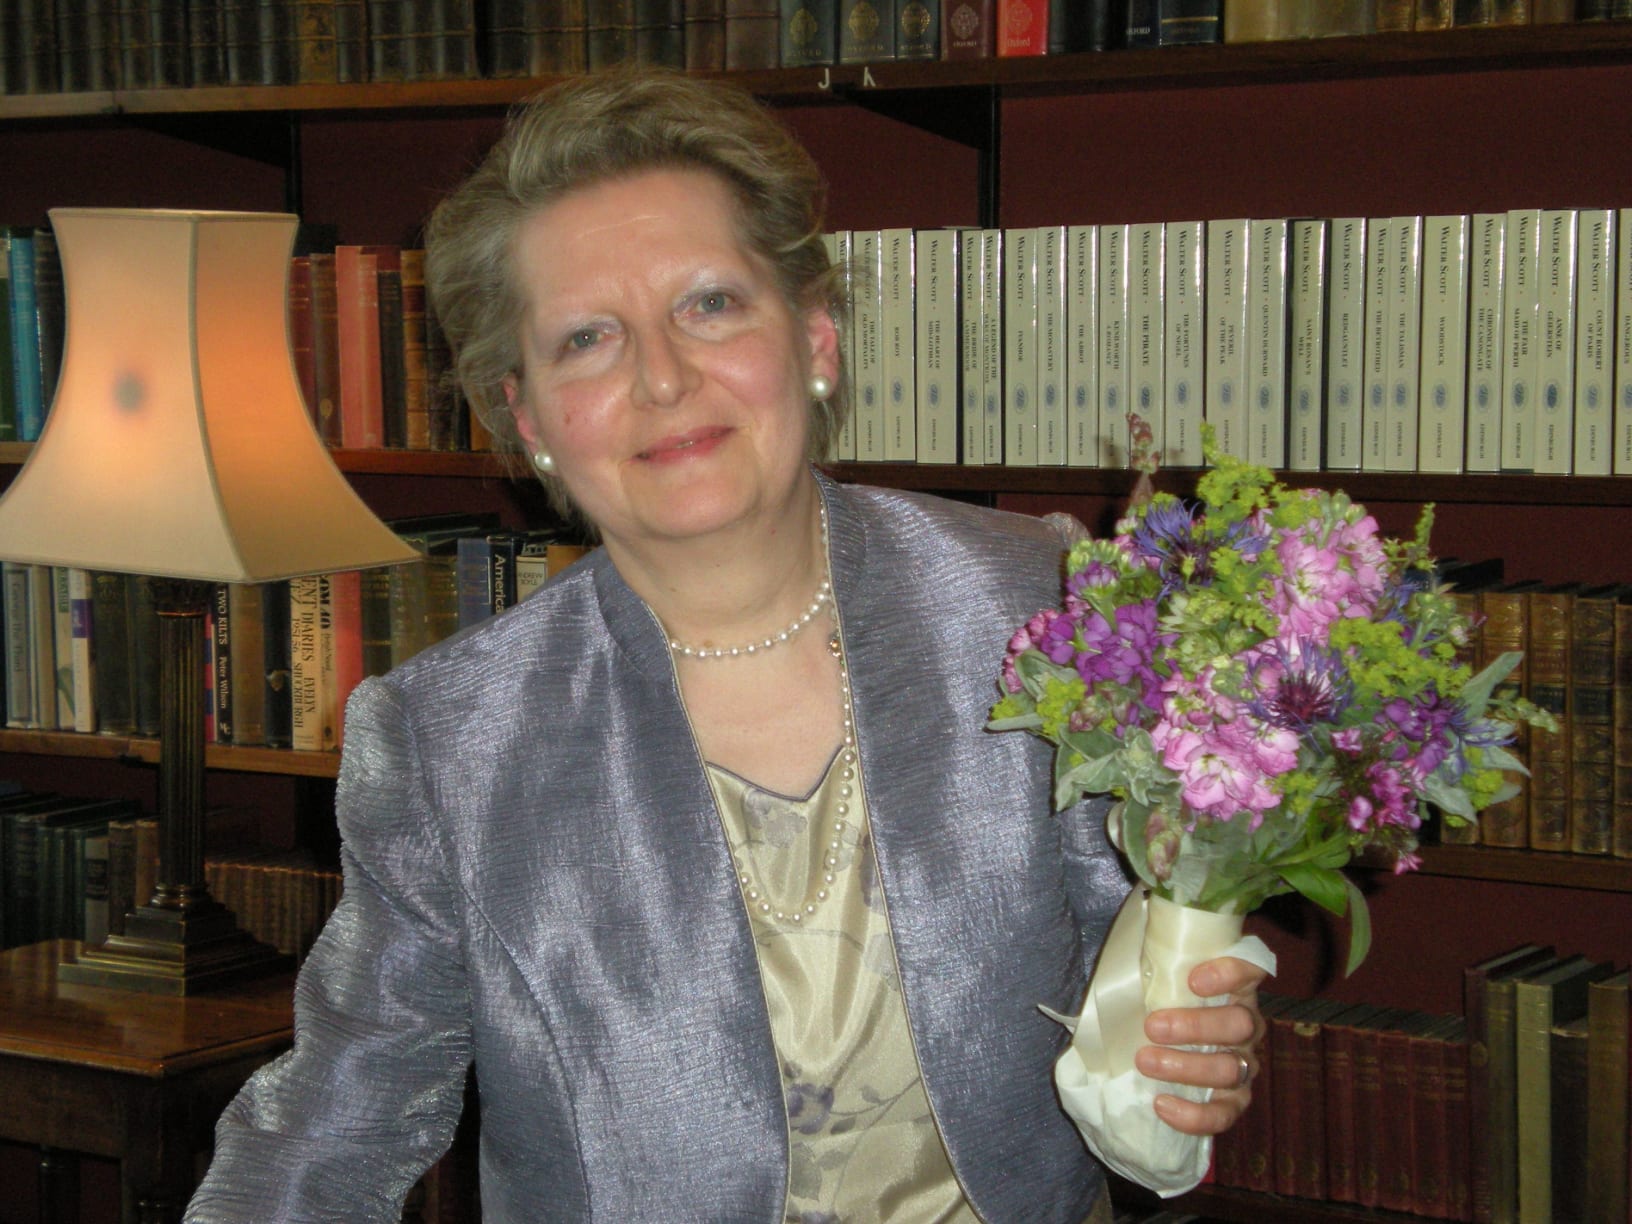 This is a photograph of Laura Scott, she is wearing a cream dress and purple blazer. She is picture in front of a bookshelf and a lamp and is holding a bunch of flowers that are pink and purple.